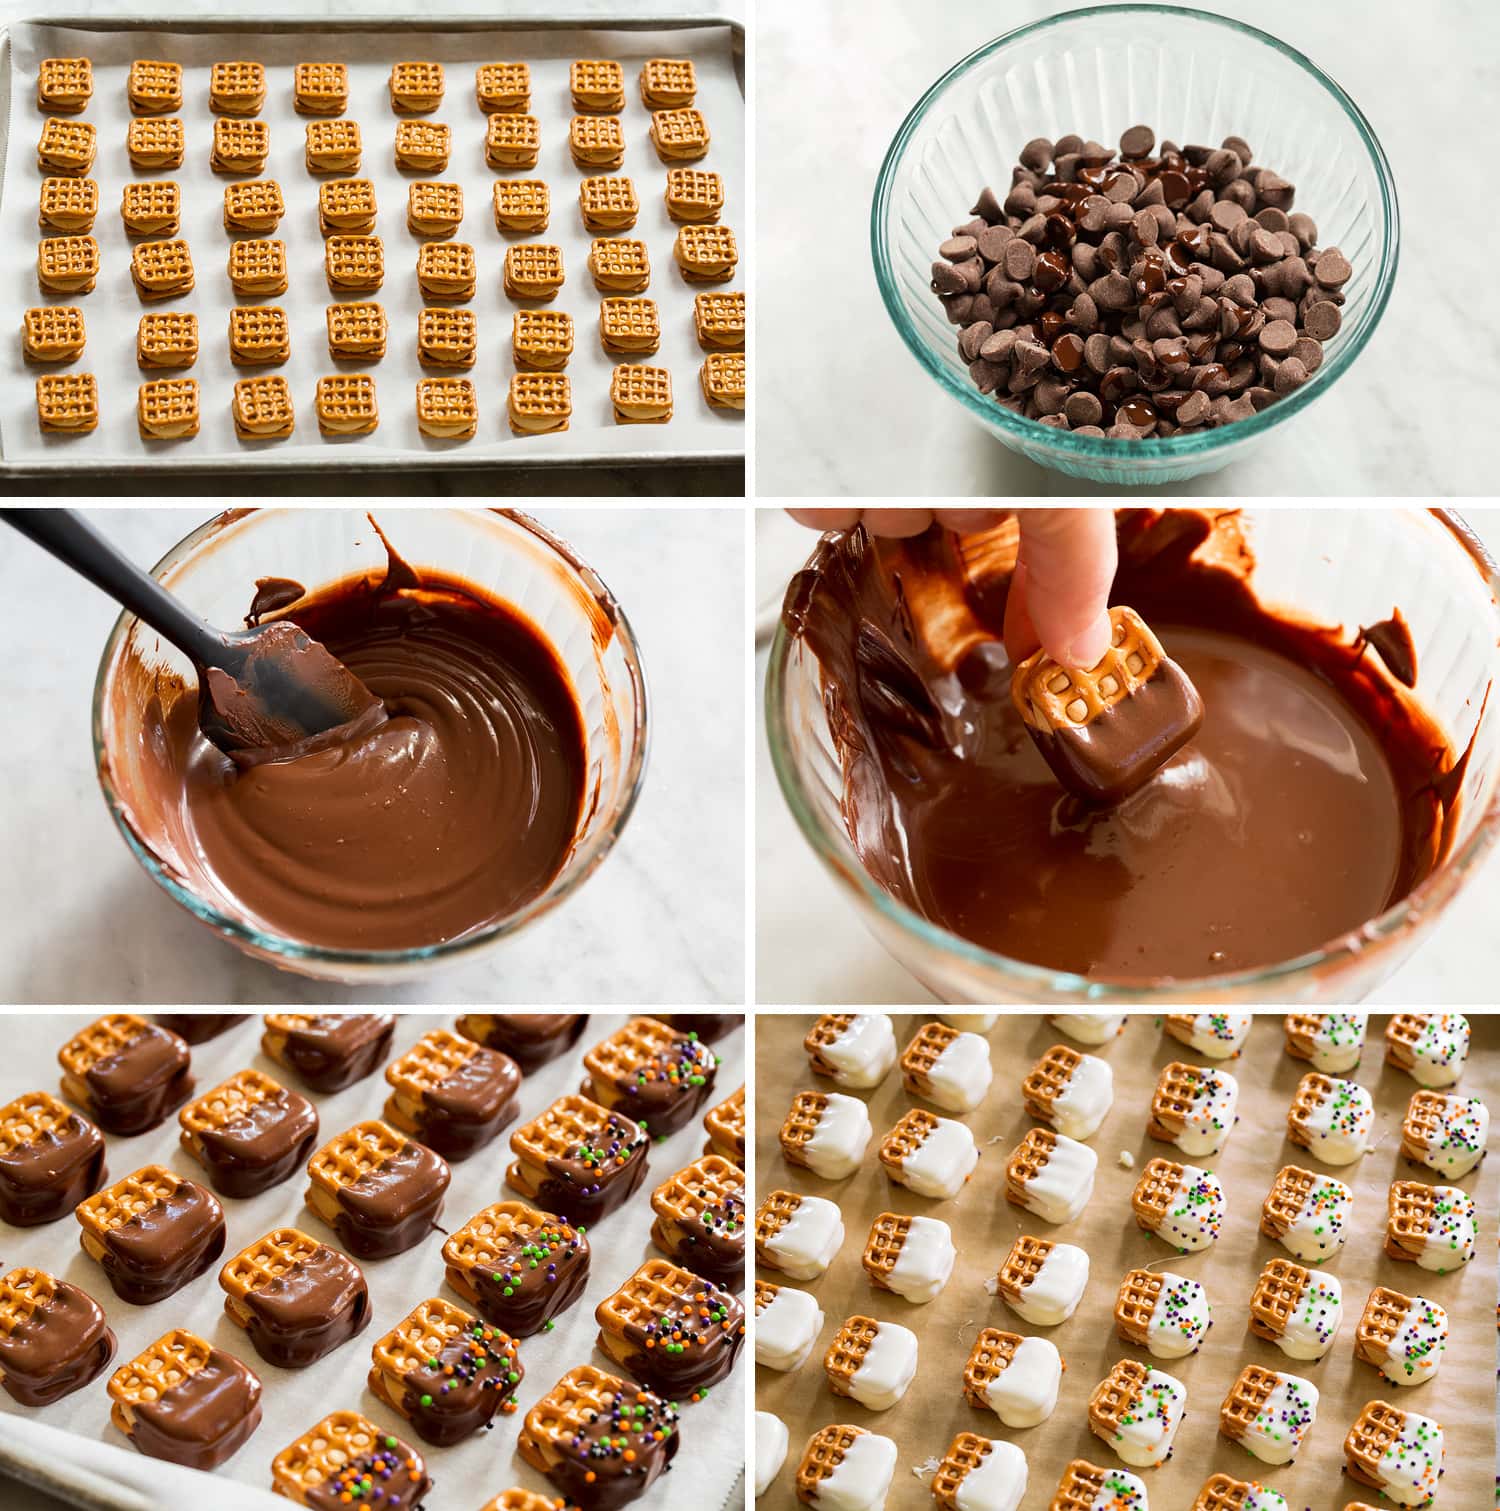 Dipping peanut butter filled pretzels in chocolate.